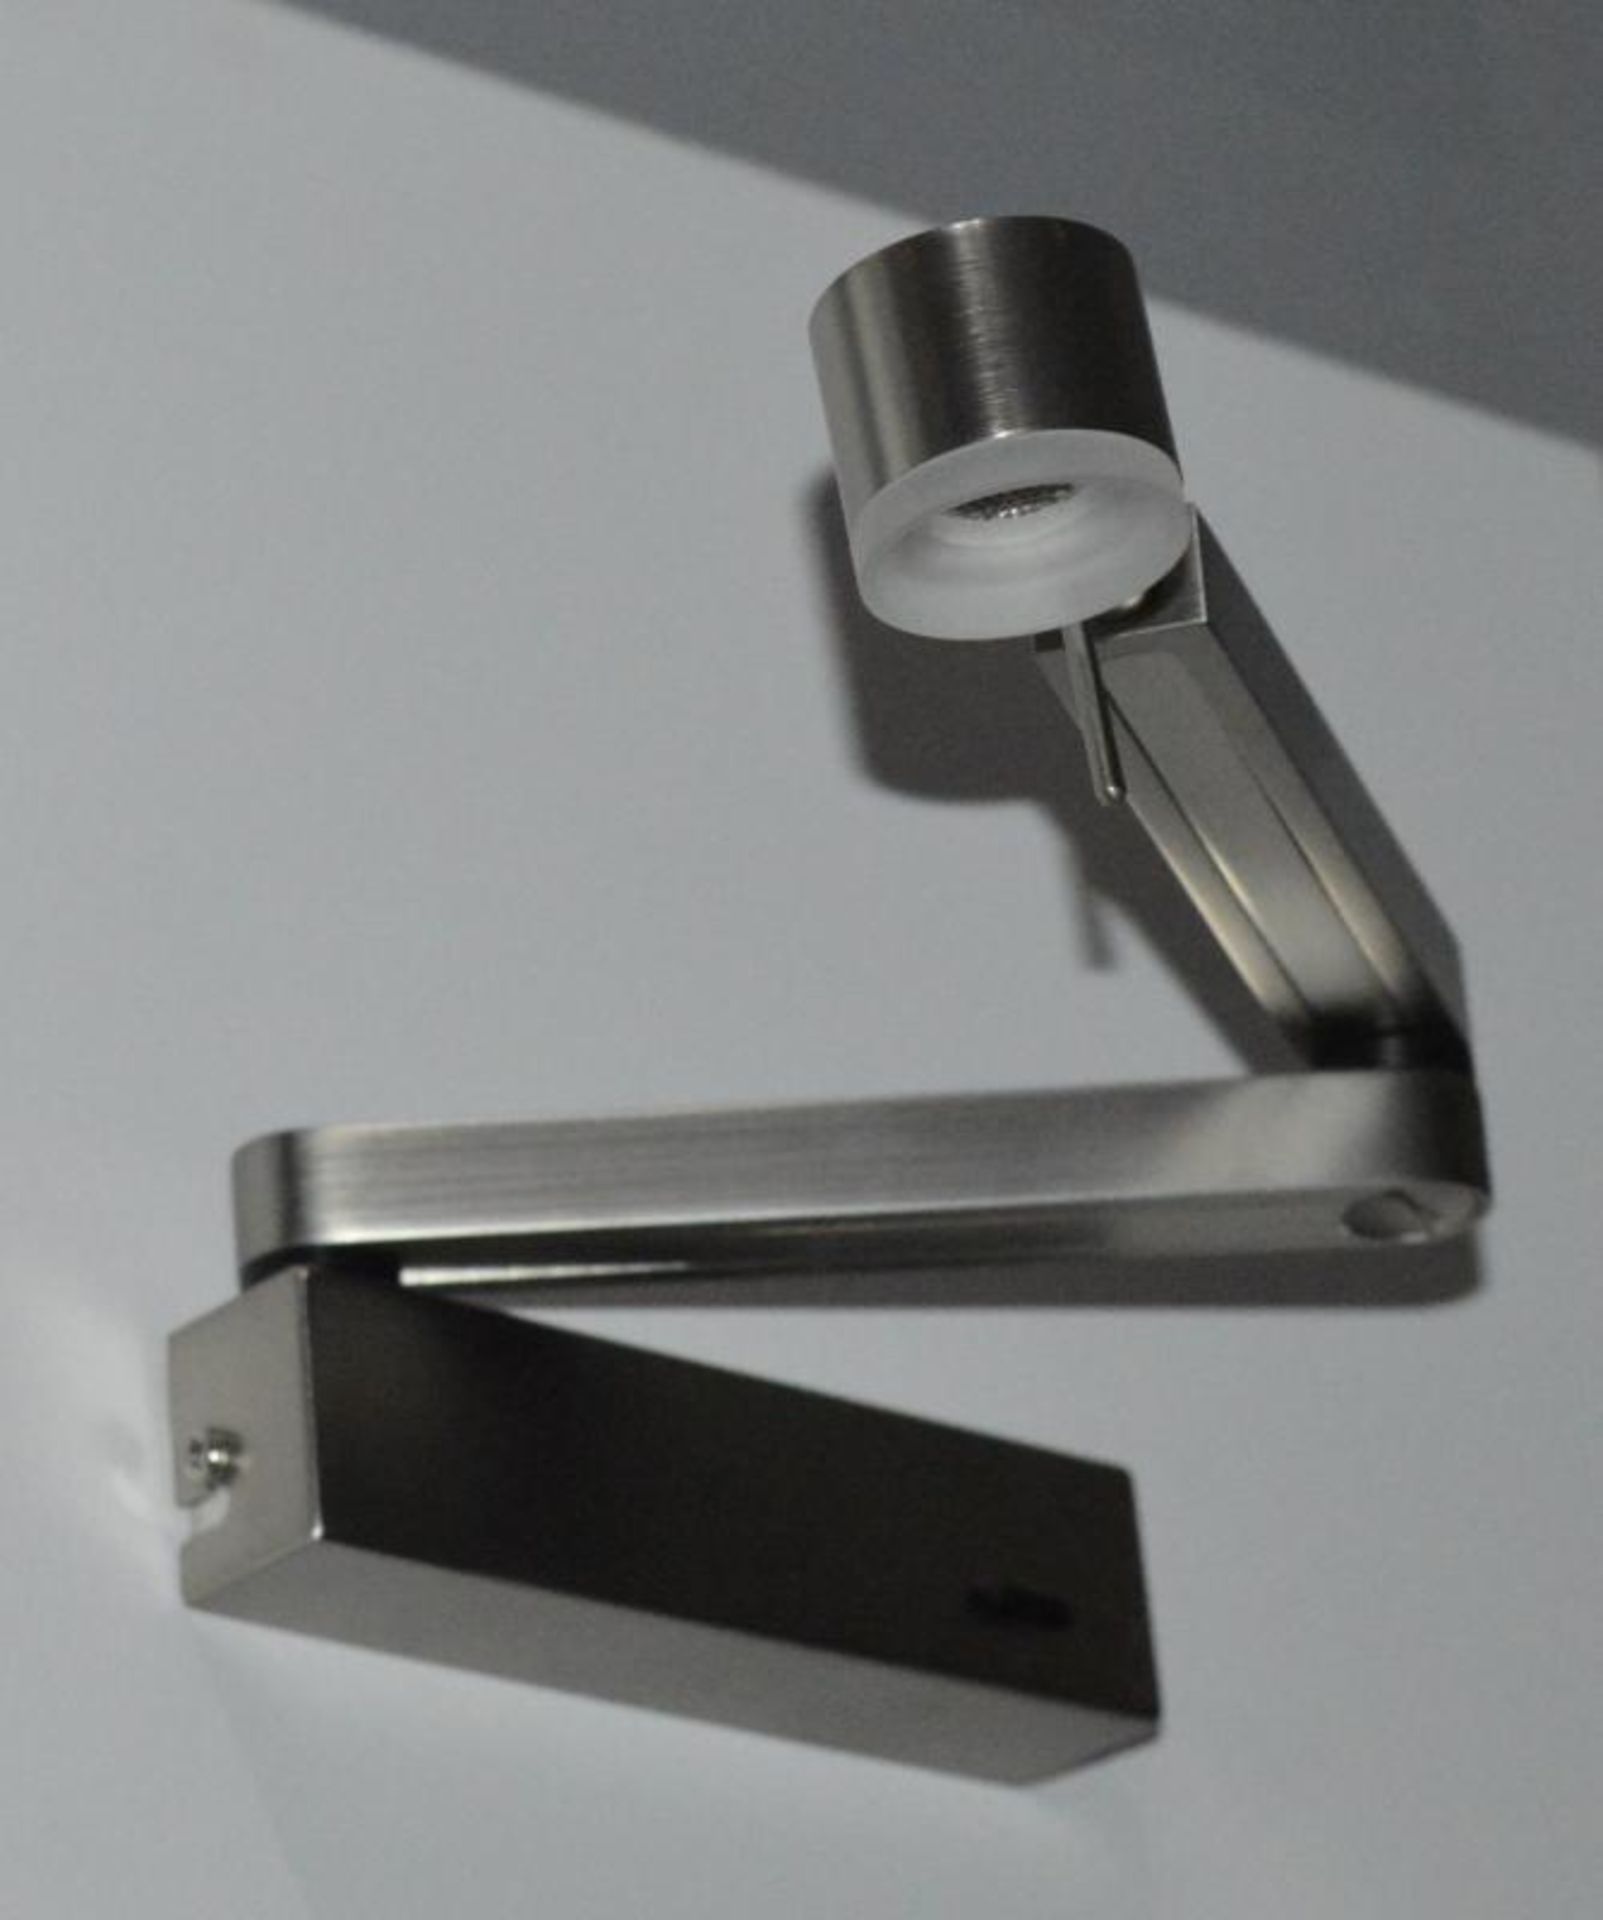 1 x Satin Silver LED Adjustable Wall Light - Ex Display Stock - CL298 - Ref J148 - Location: Altrinc - Image 3 of 3